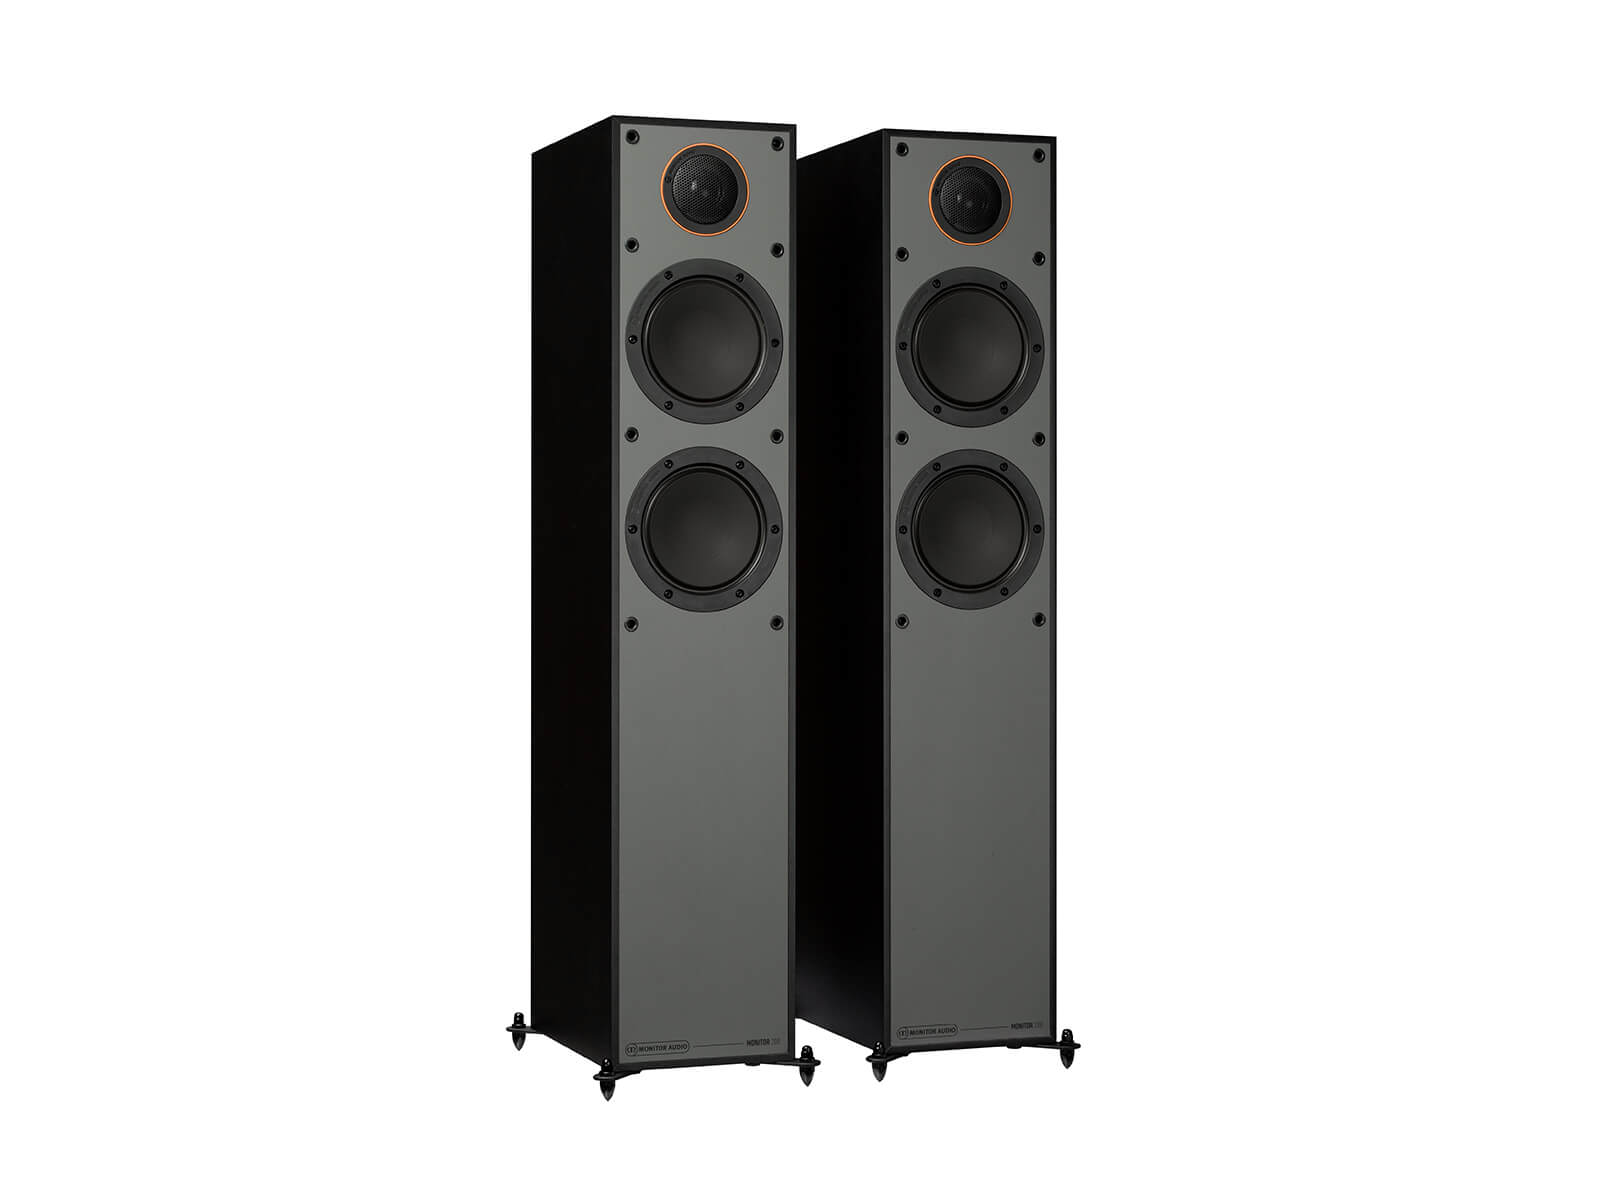 Monitor 200, floorstanding speakers, without grilles in a black finish.